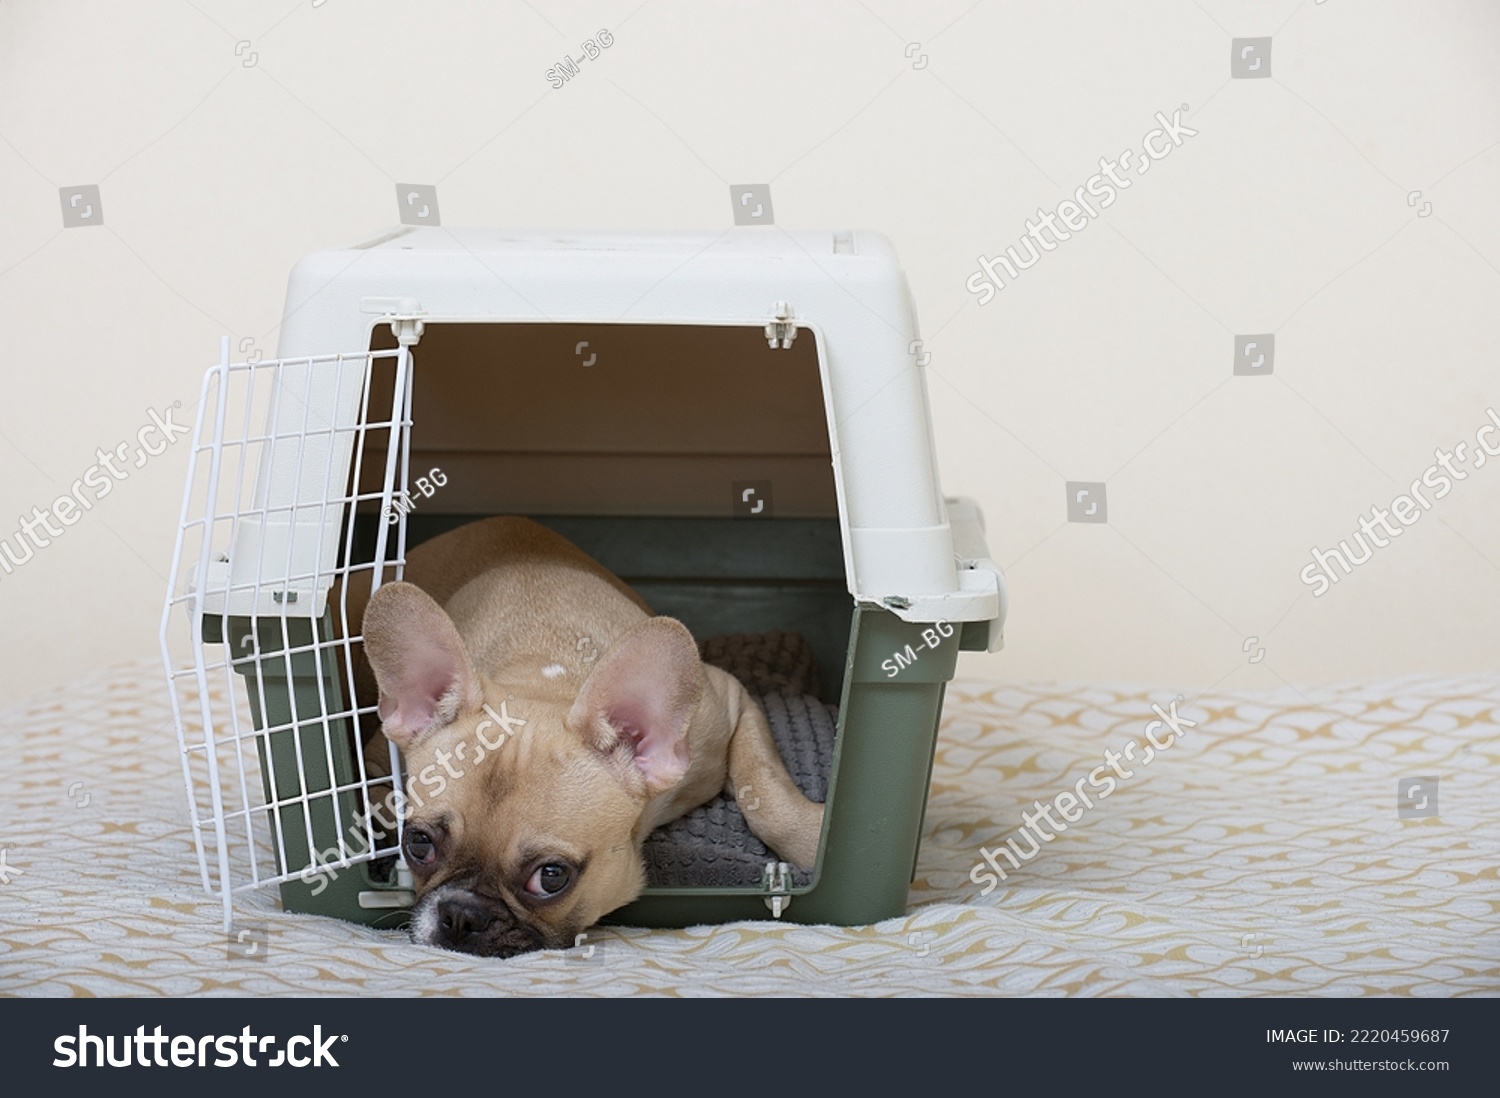 A French Bulldog dog lies in a large plastic box for transporting animals, lying on a soft bedding with its head on the floor. The dog is ready to travel. #2220459687